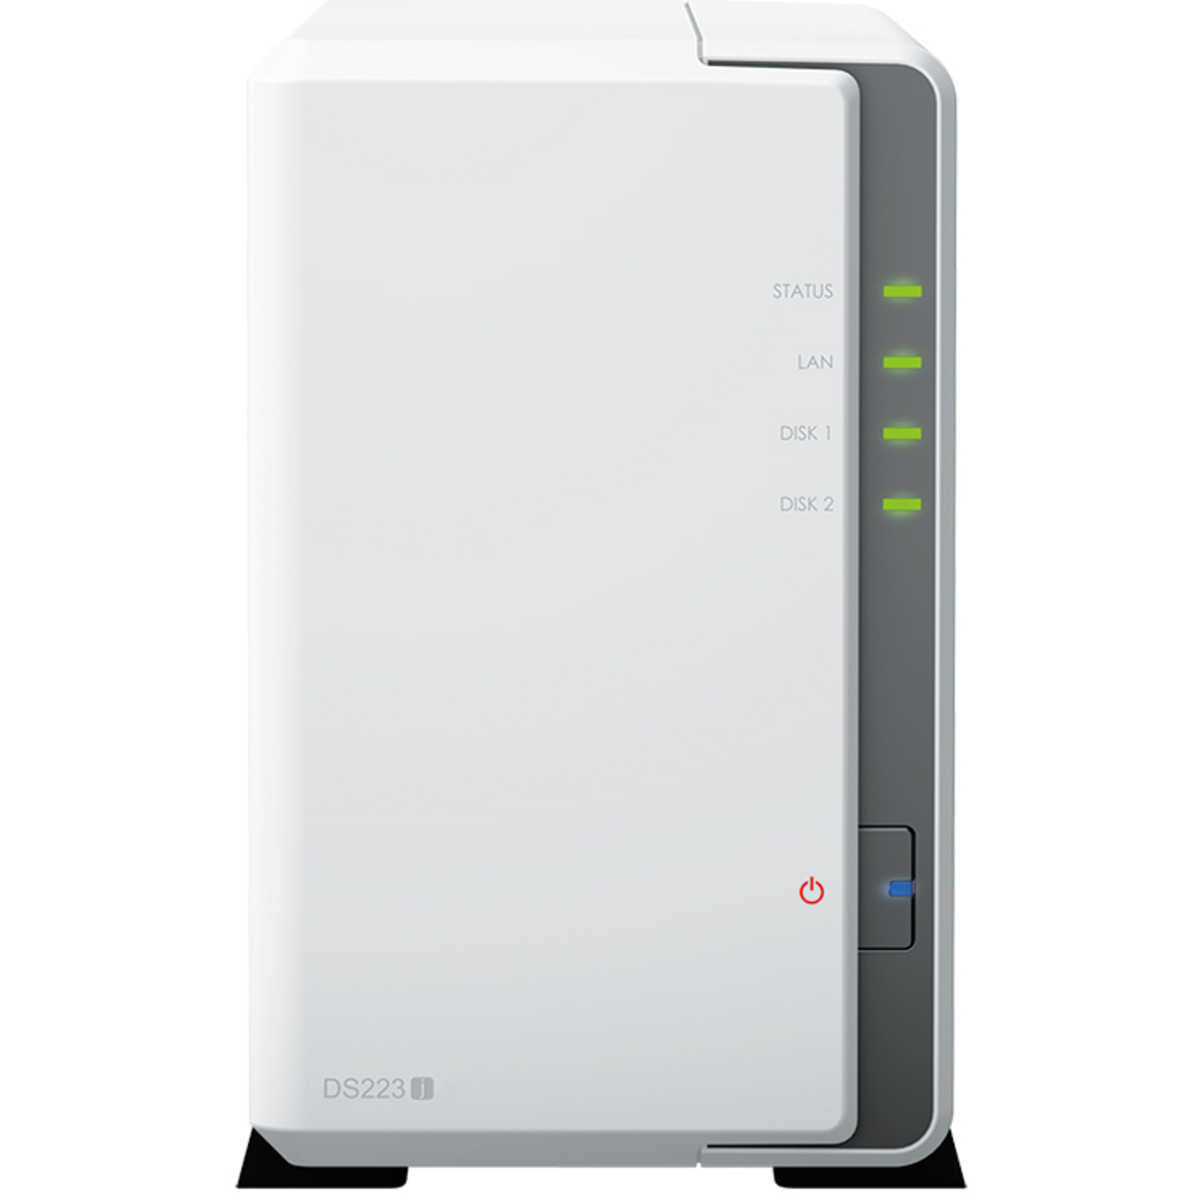 Synology DiskStation DS223j 8tb 2-Bay Desktop Personal / Basic Home / Small Office NAS - Network Attached Storage Device 2x4tb Seagate IronWolf Pro ST4000NT001 3.5 7200rpm SATA 6Gb/s HDD NAS Class Drives Installed - Burn-In Tested DiskStation DS223j